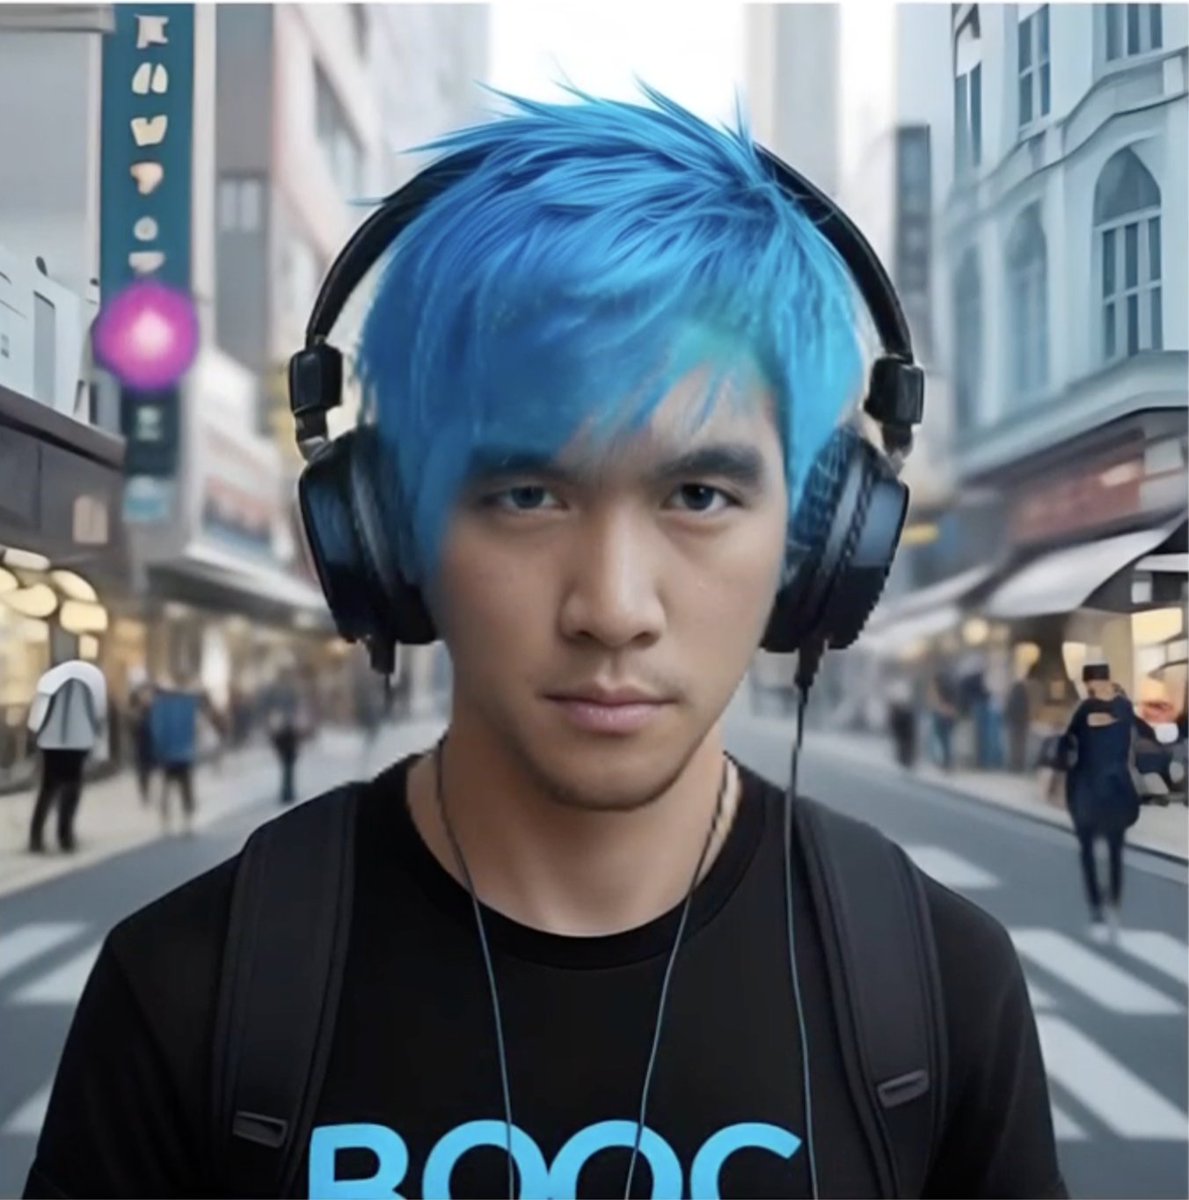 How'd I look with blue hair? This awesome @streamlit app by @mgmasha12 generates the following photo. What do you think? Check it out (links in the Quote retweet below 👇)